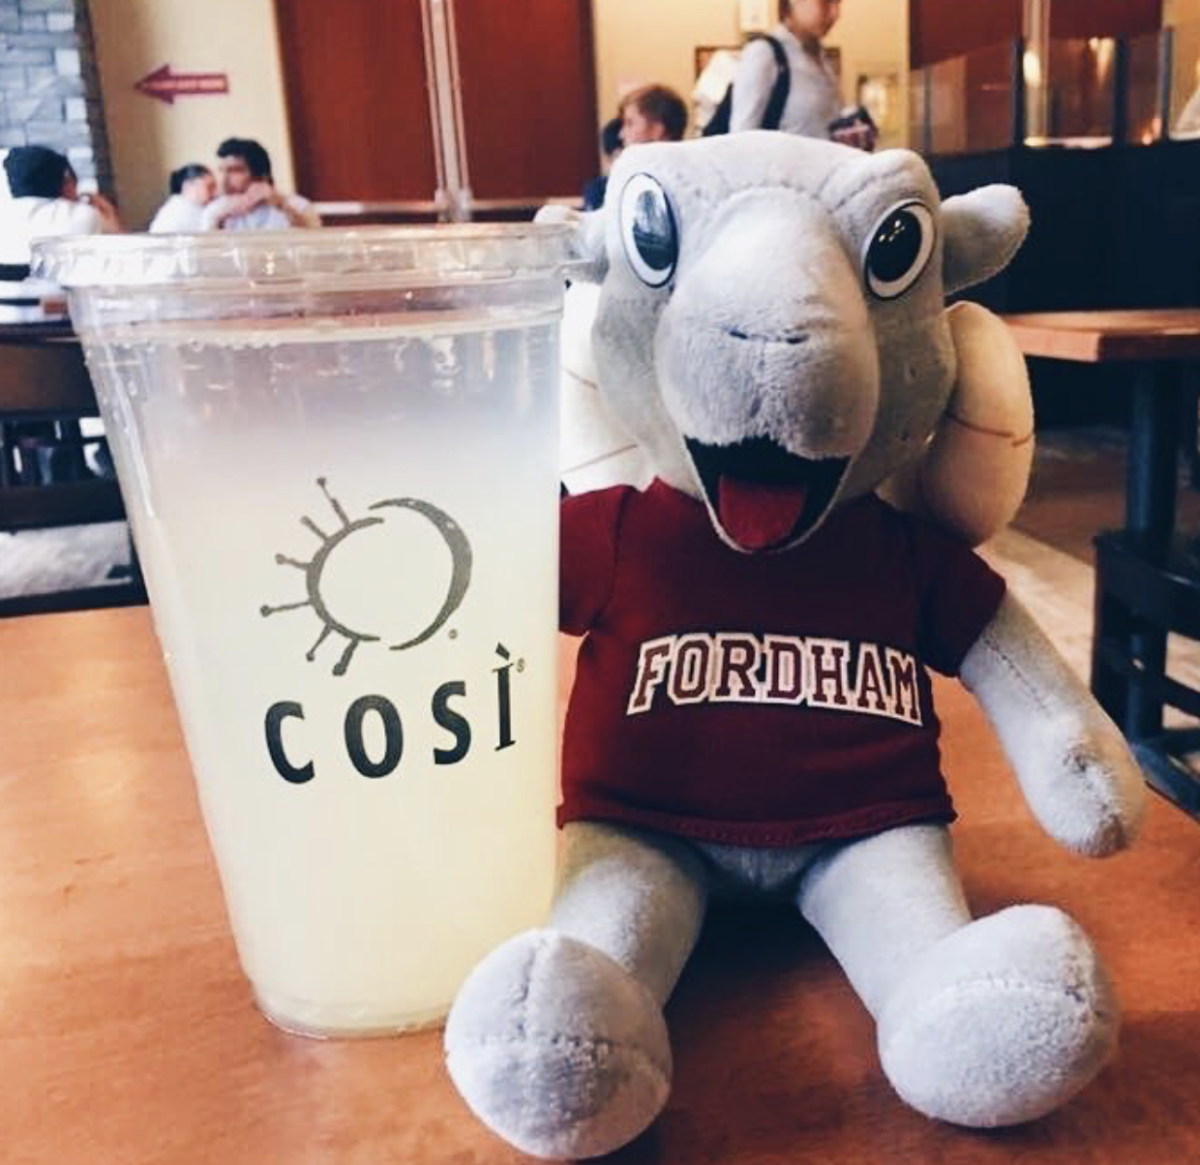 Cosi+is+a+popular+dining+spot+for+Fordham+students.+%28Courtesy+of+Instagram%29